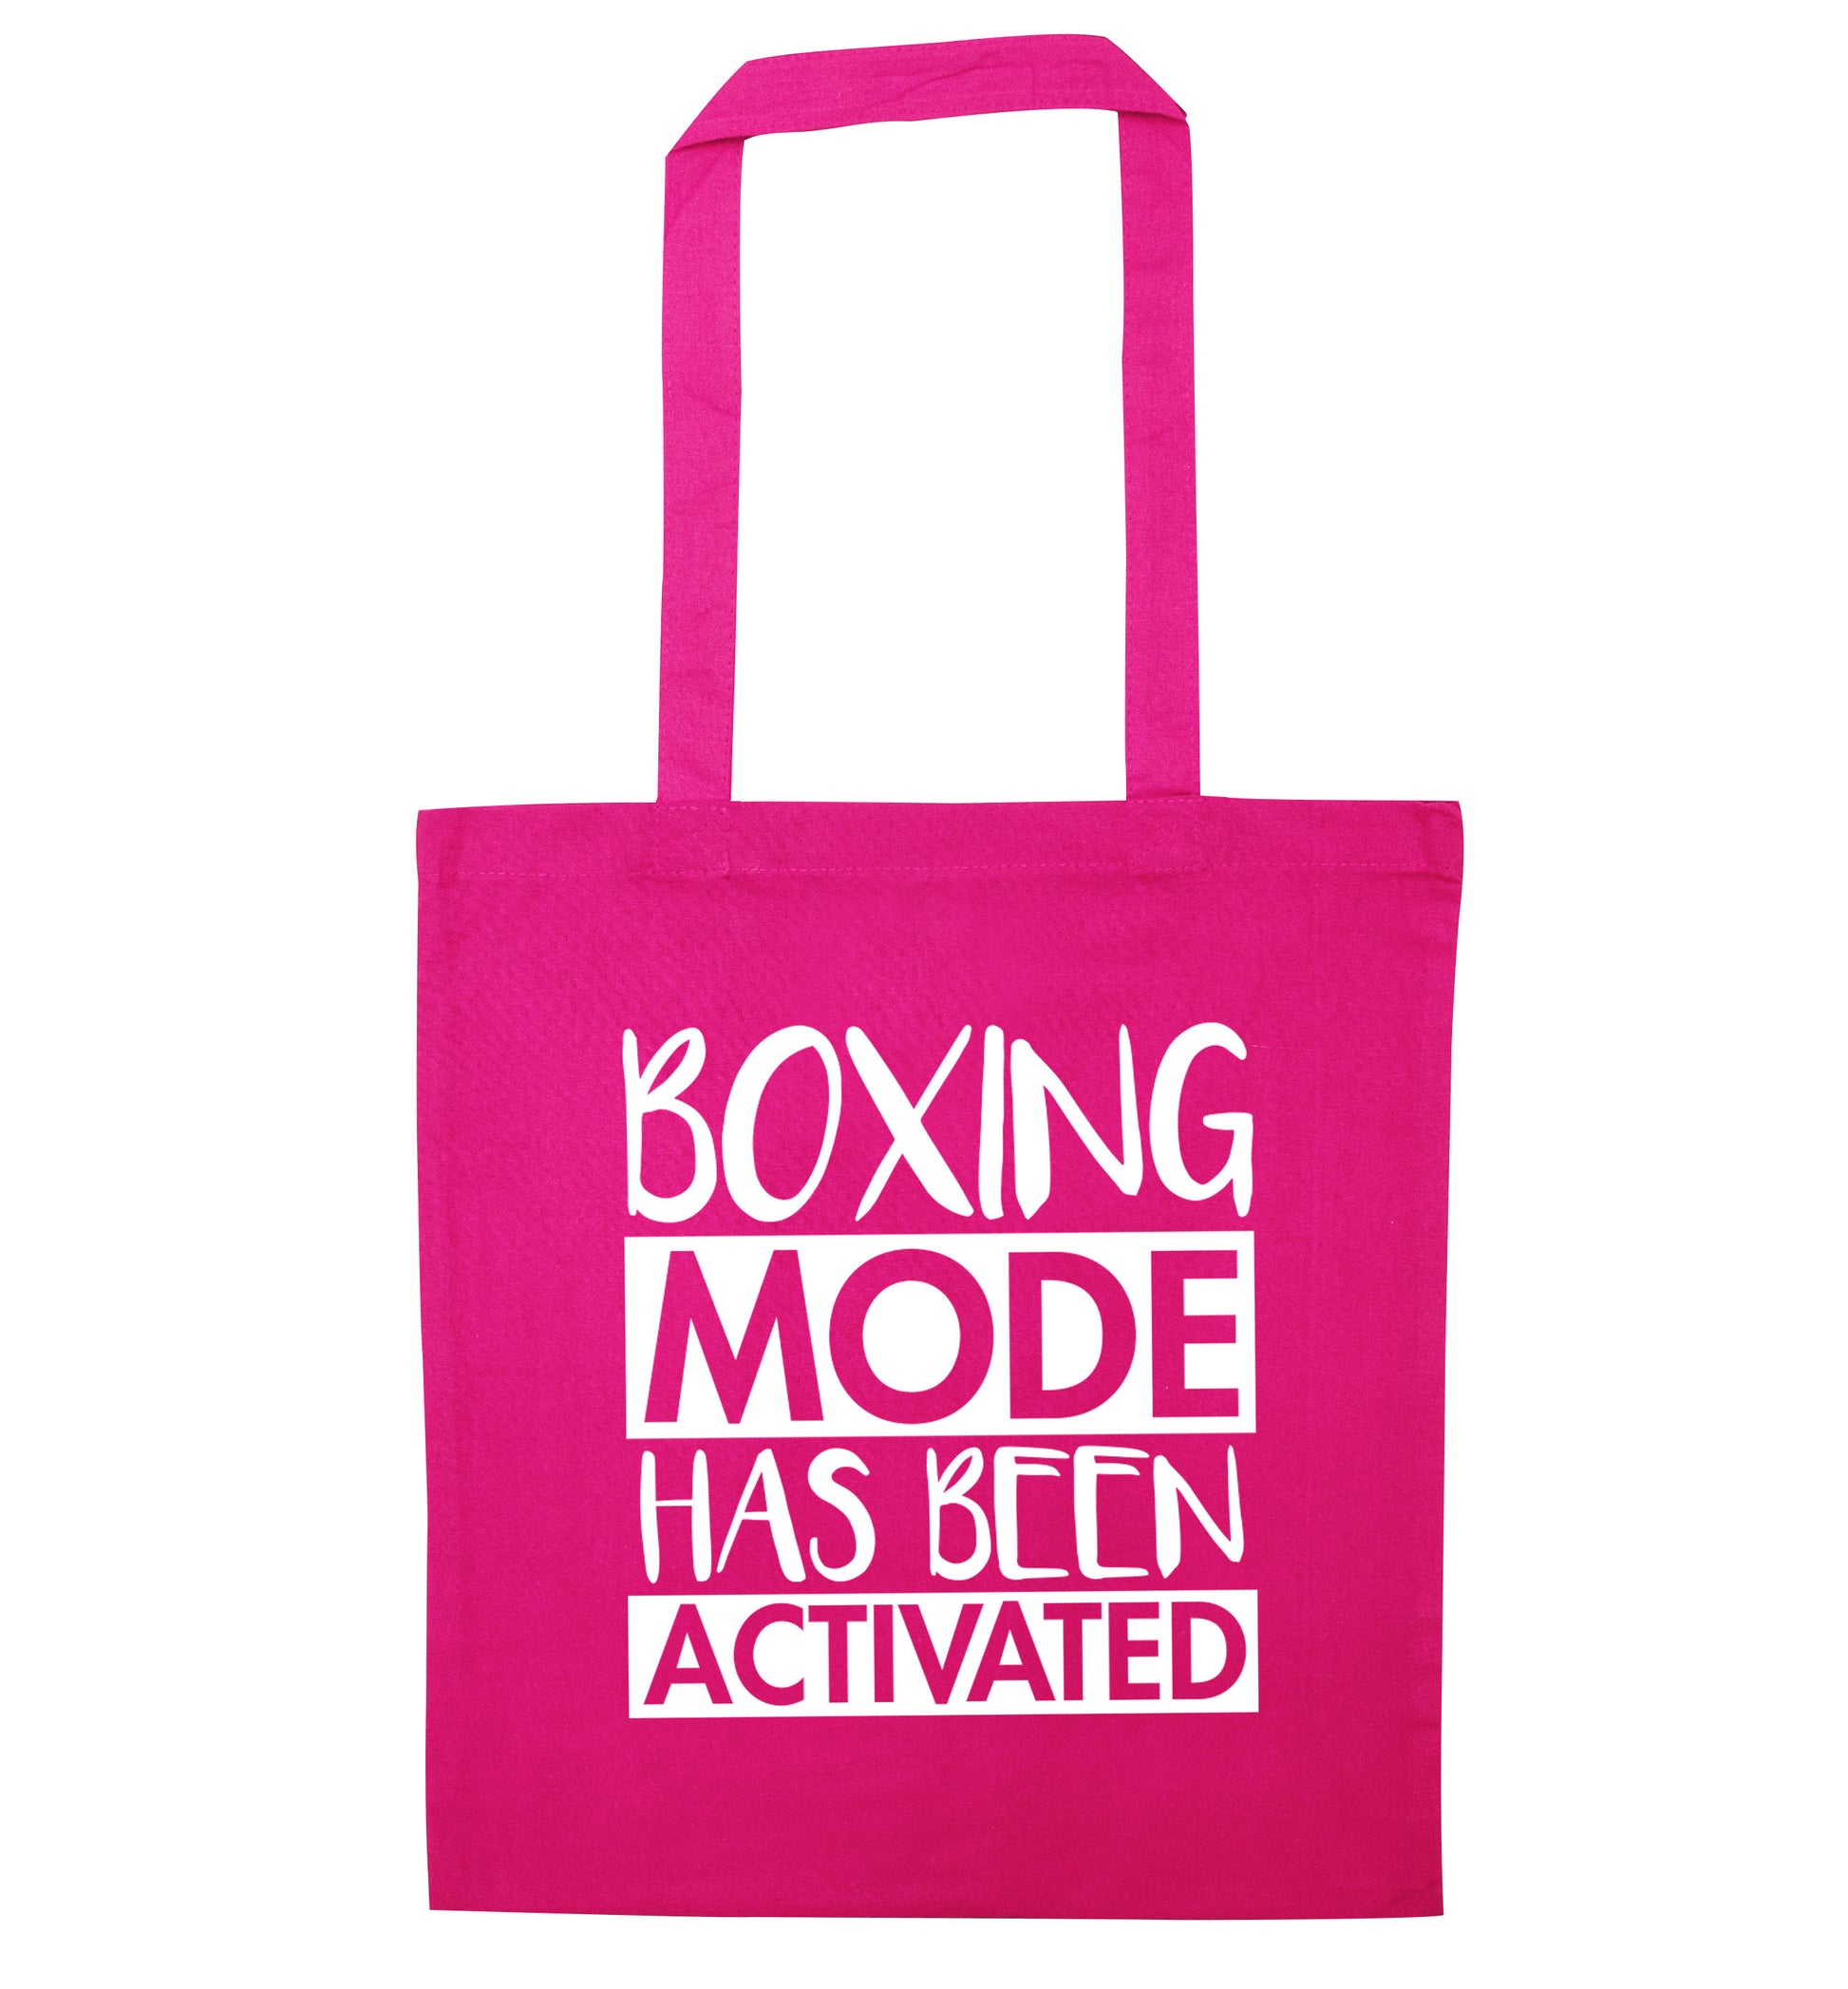 Boxing mode activated pink tote bag